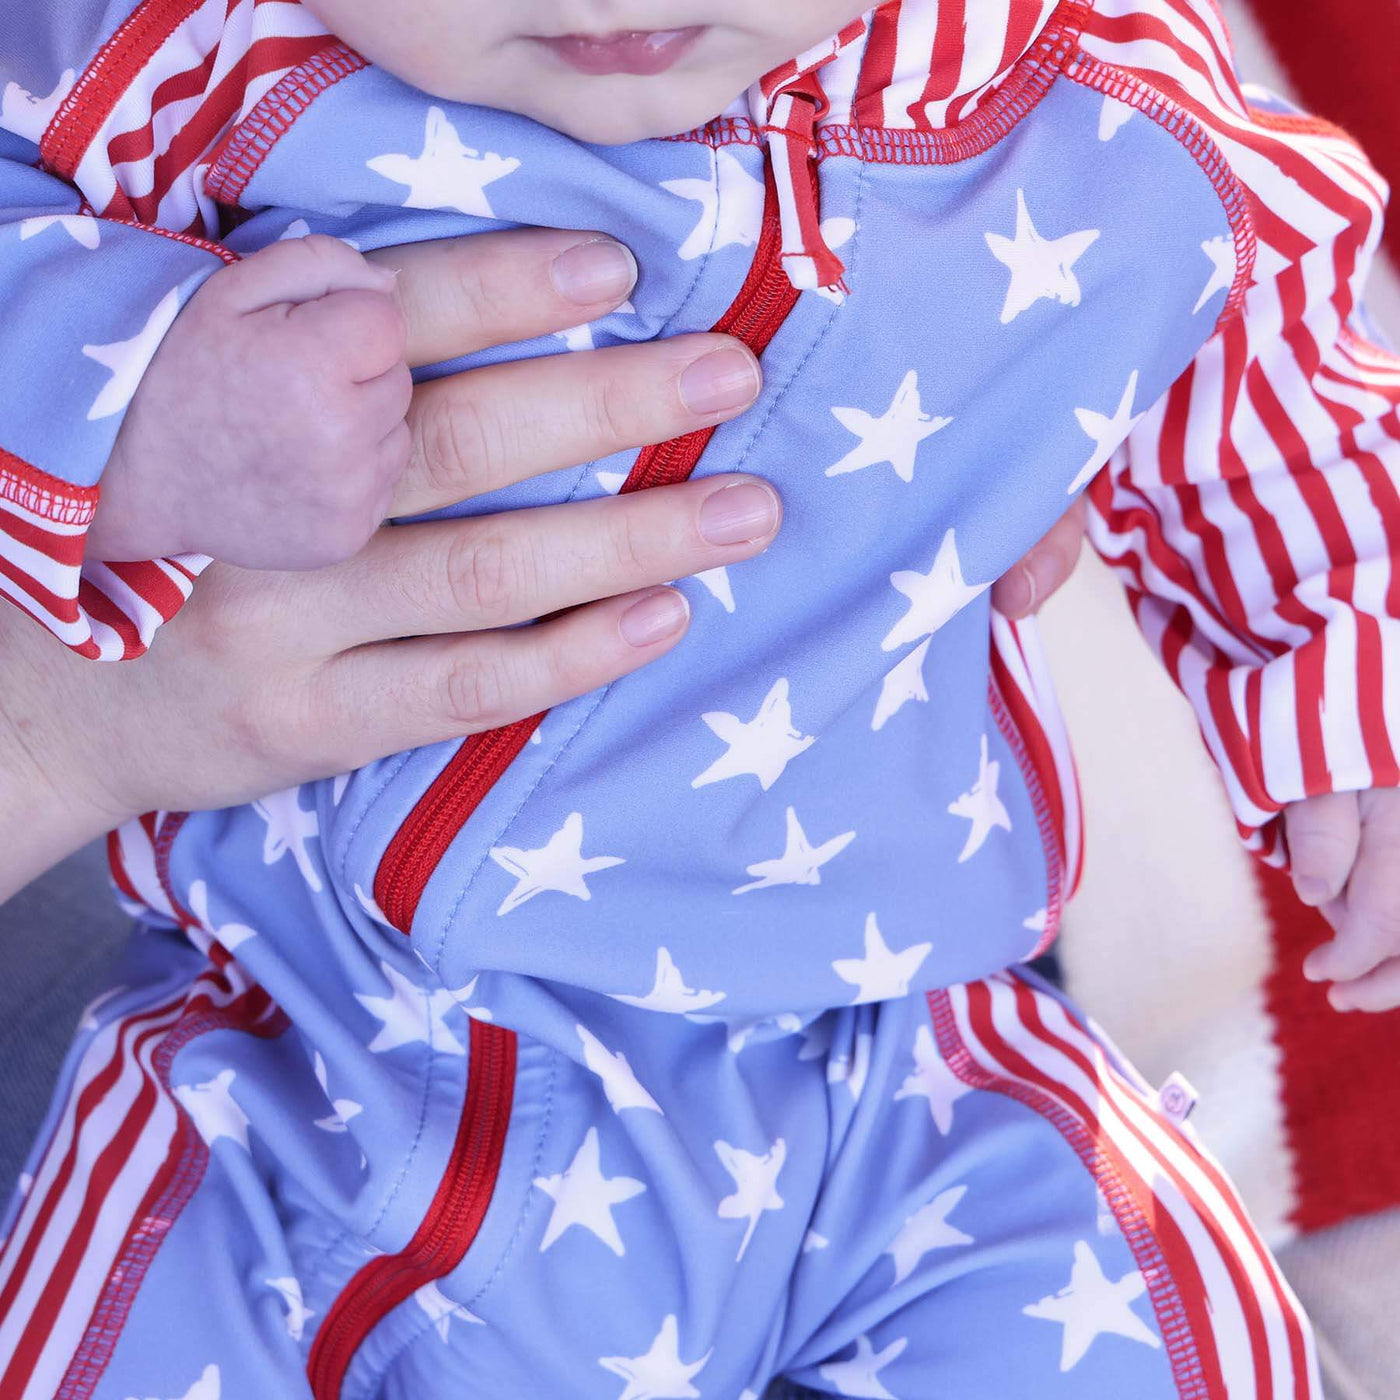 red white and blue full length rash guard for boy 